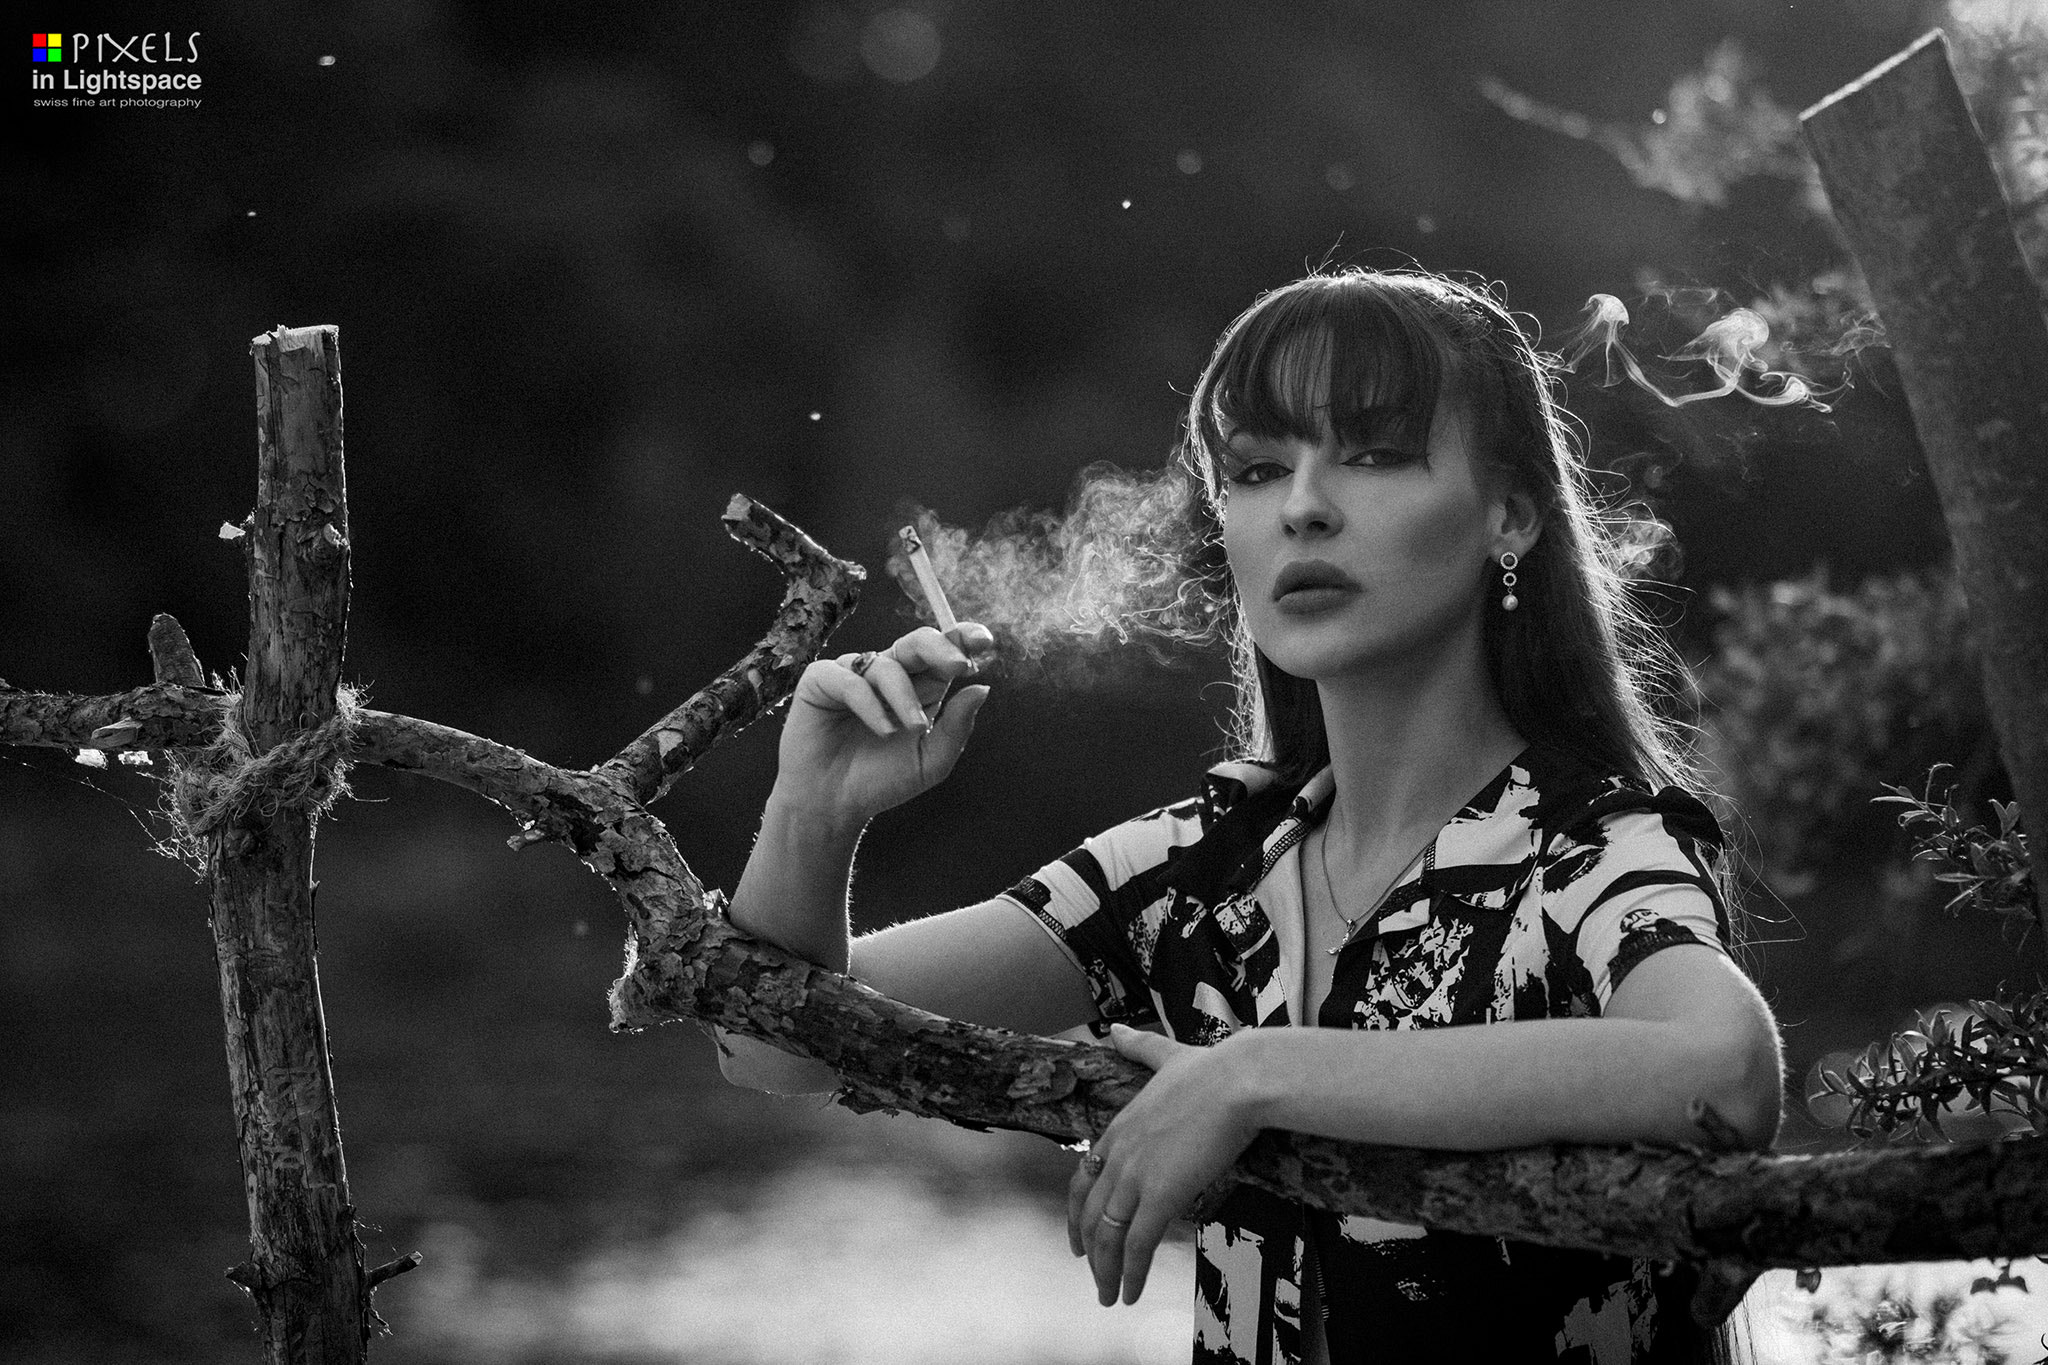 People 2048x1365 women model women outdoors smoking cigarettes looking at viewer monochrome Pixels in Lightspace watermarked